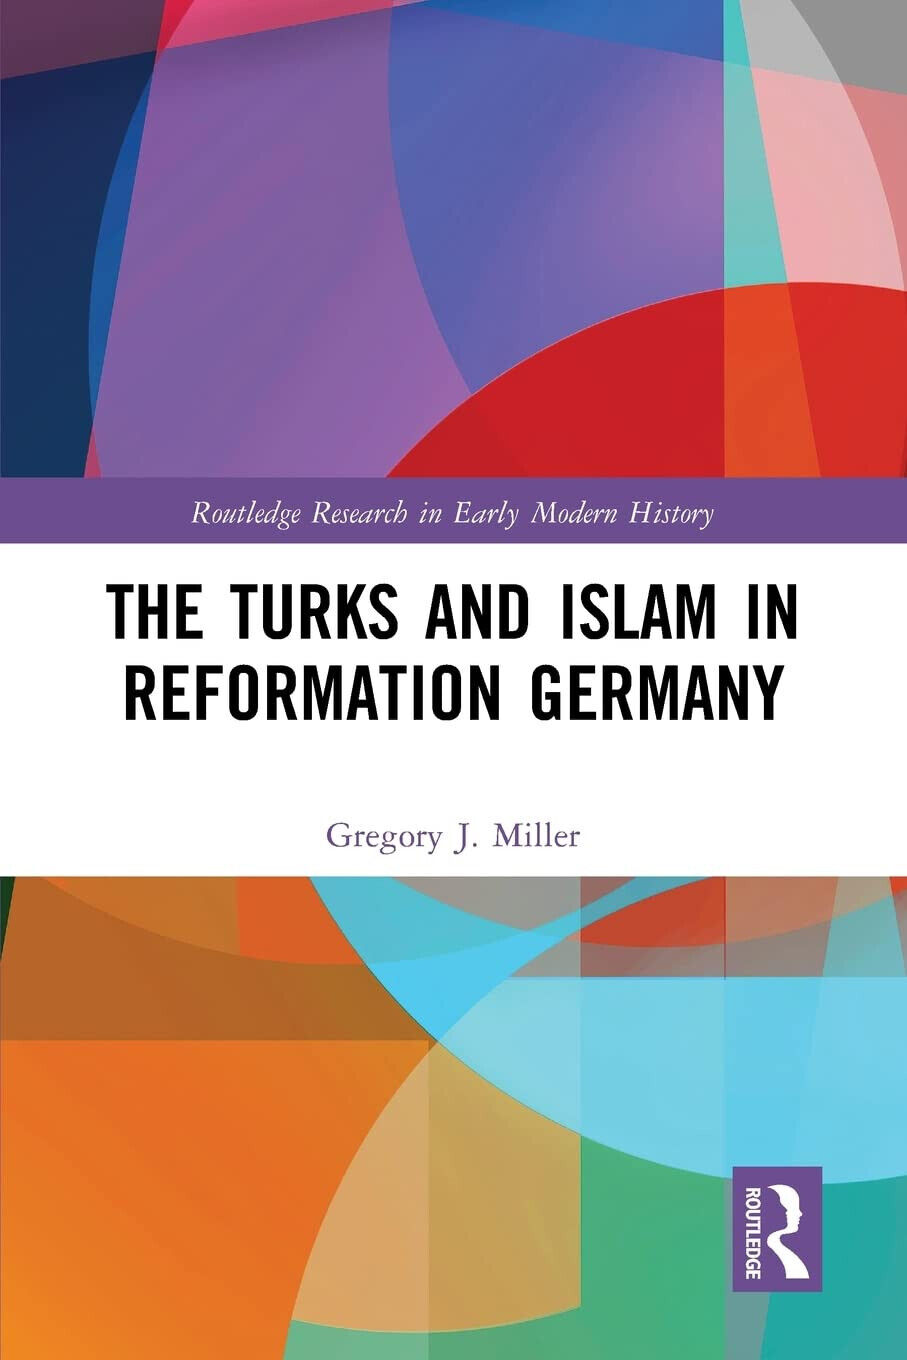 The Turks And Islam In Reformation Germany - Gregory J. Miller - Routledge, 2021